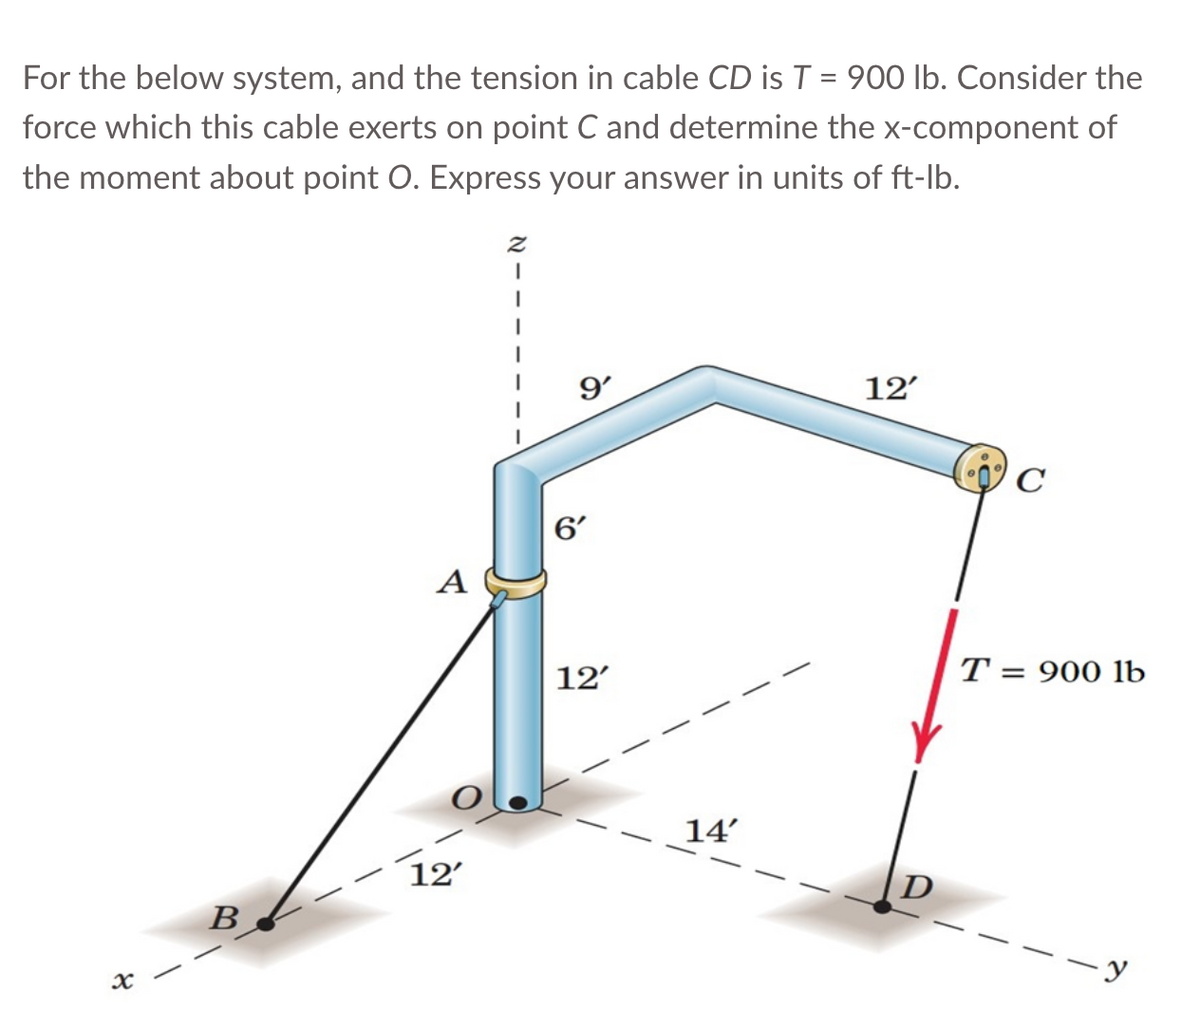 For the below system, and the tension in cable CD is T = 900 lb. Consider the
force which this cable exerts on point C and determine the x-component of
the moment about point O. Express your answer in units of ft-lb.
x
B
A
12'
z
I
9'
6'
12'
14'
12'
D
C
T = 900 lb
y